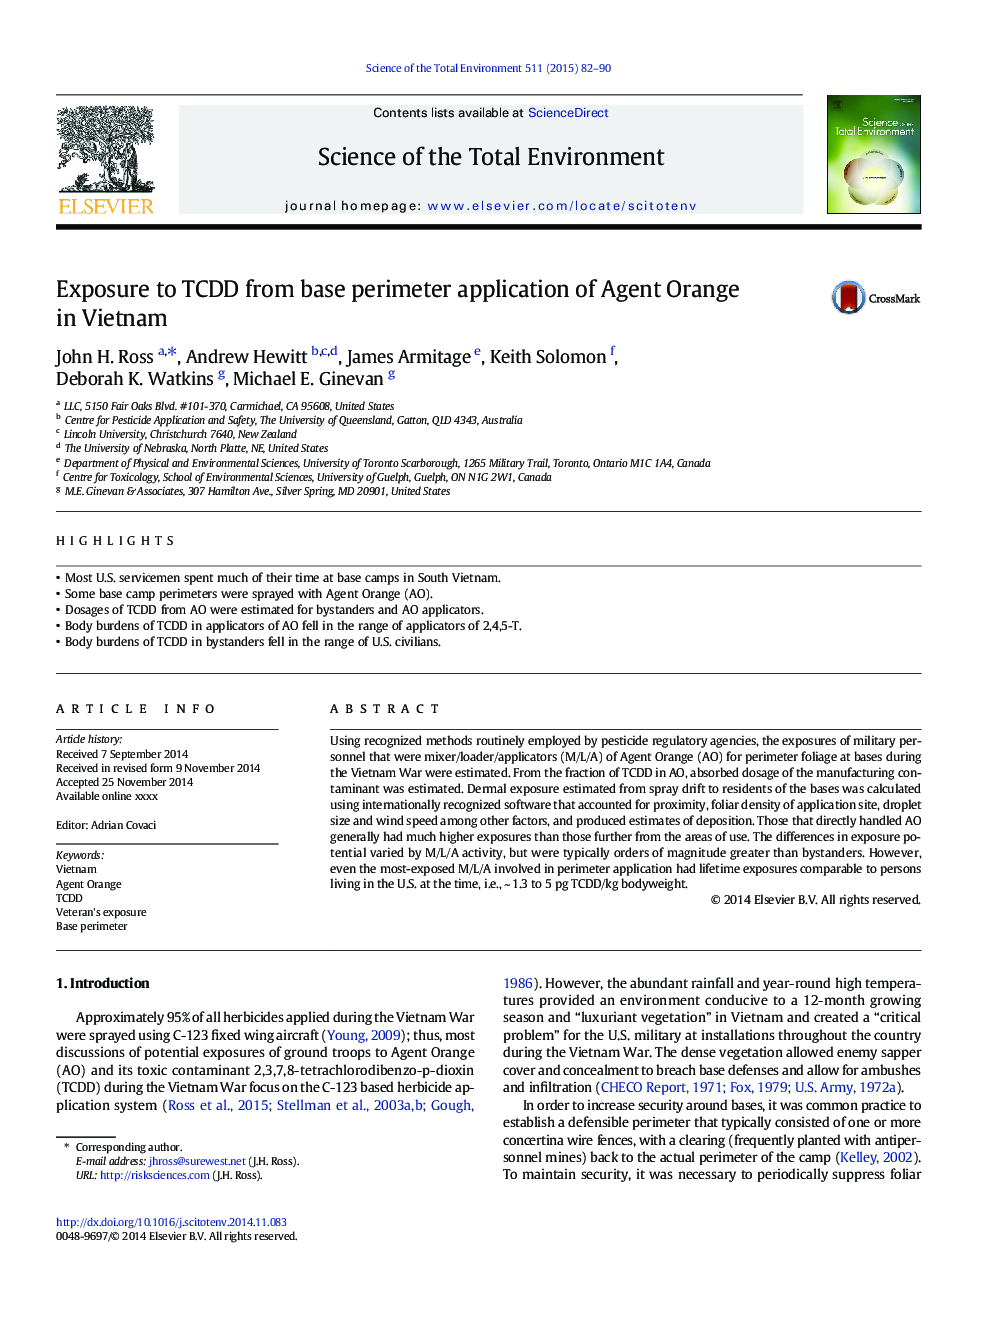 Exposure to TCDD from base perimeter application of Agent Orange in Vietnam